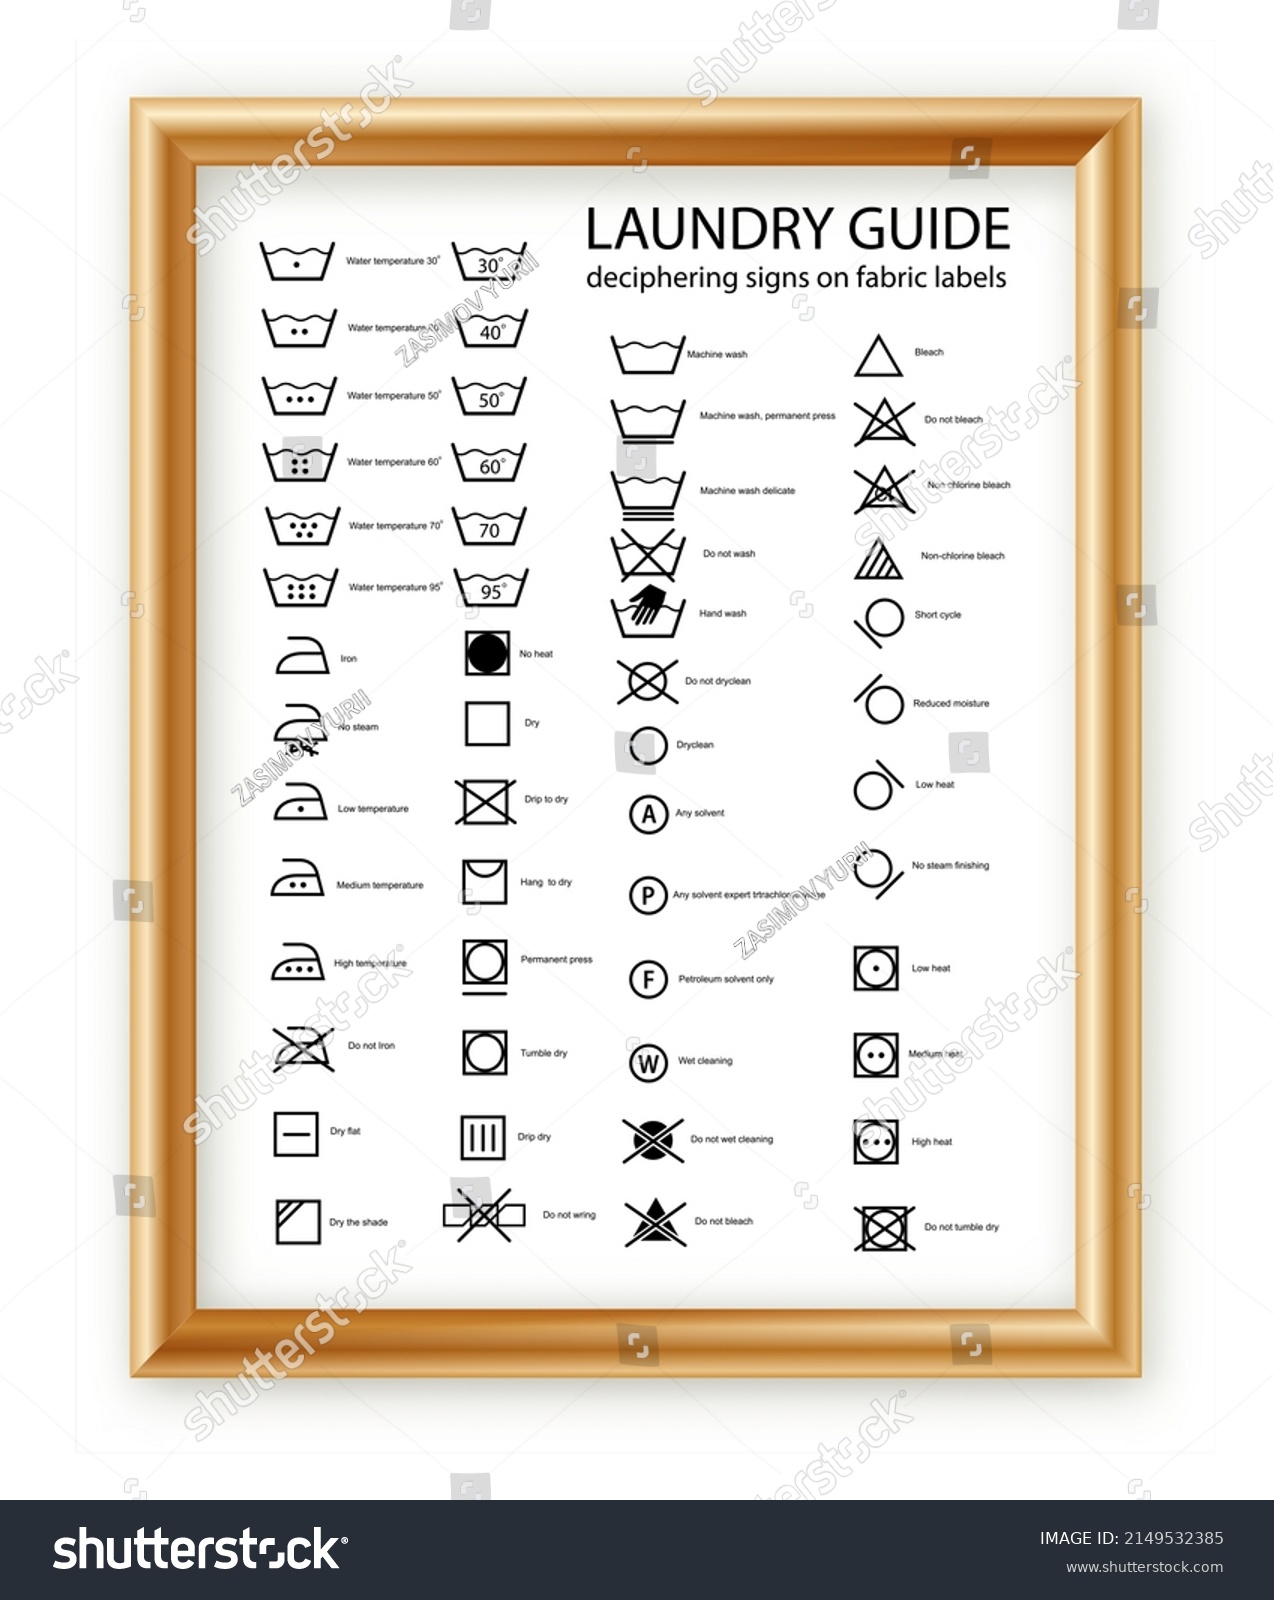 SVG of Laundry icons. Garment care instructions on labels, machine wash or hand wash signs. Collection of symbols of water temperature, ironing and drying, types of textiles and fabrics.Vector svg